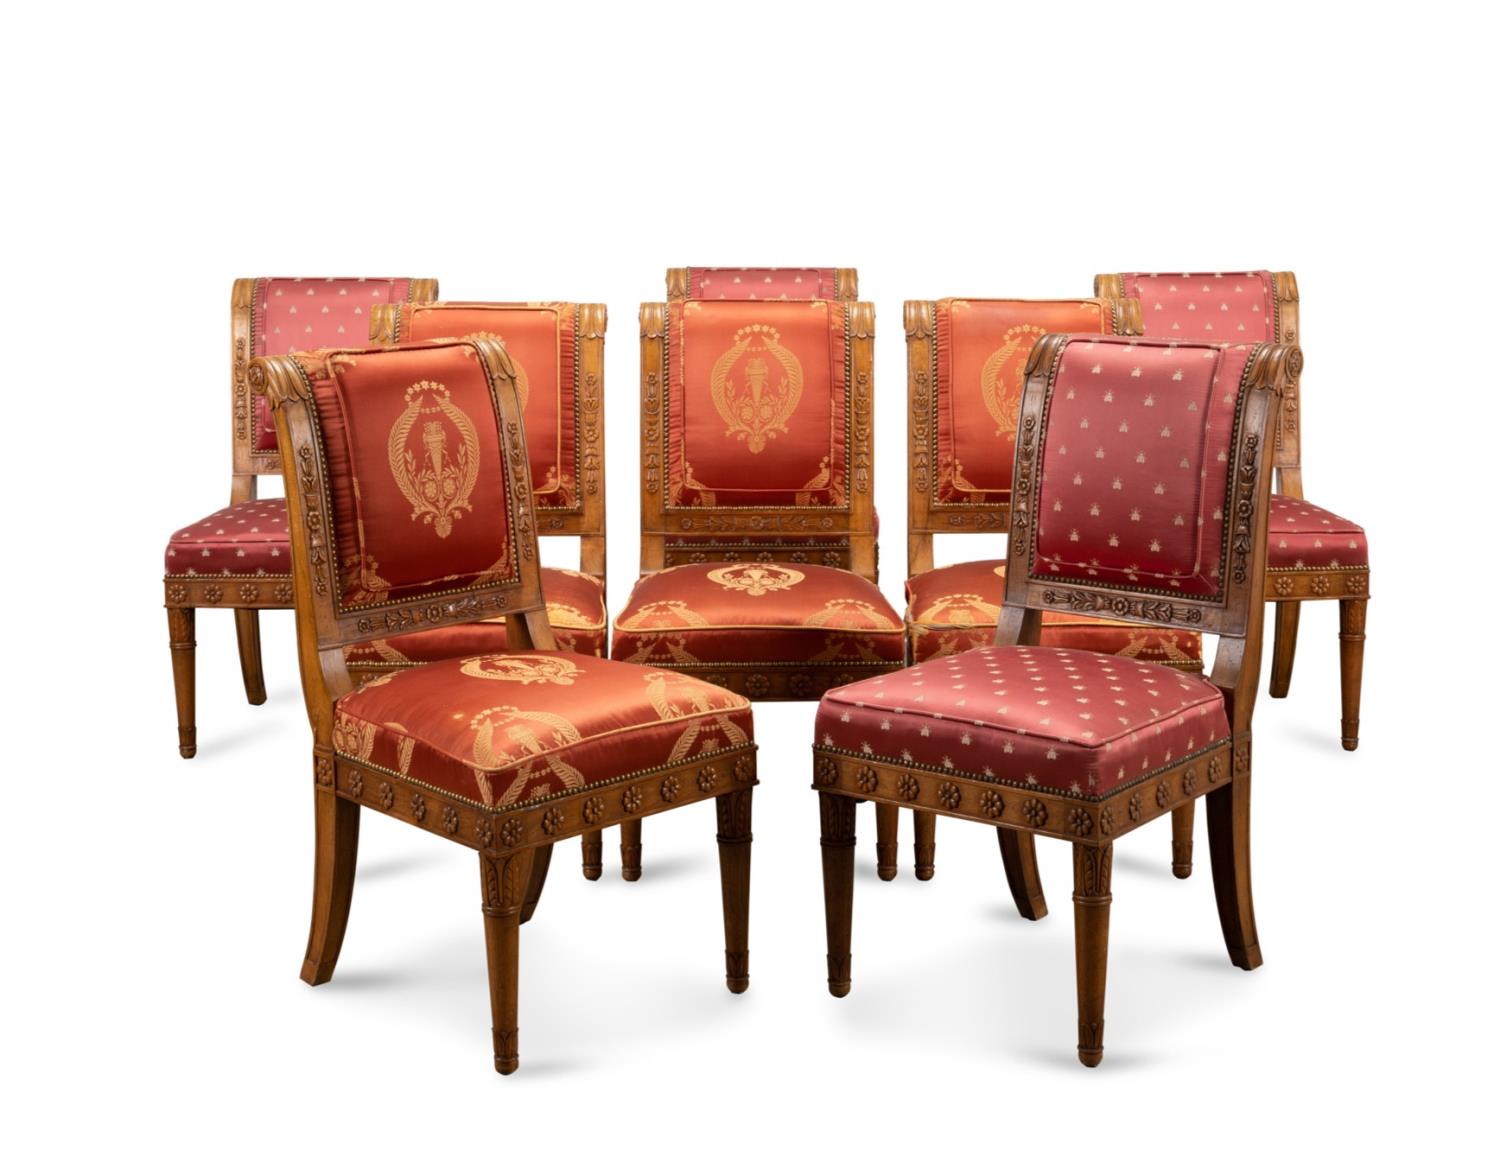 8 EMPIRE STYLE SIDE CHAIRS, TWO